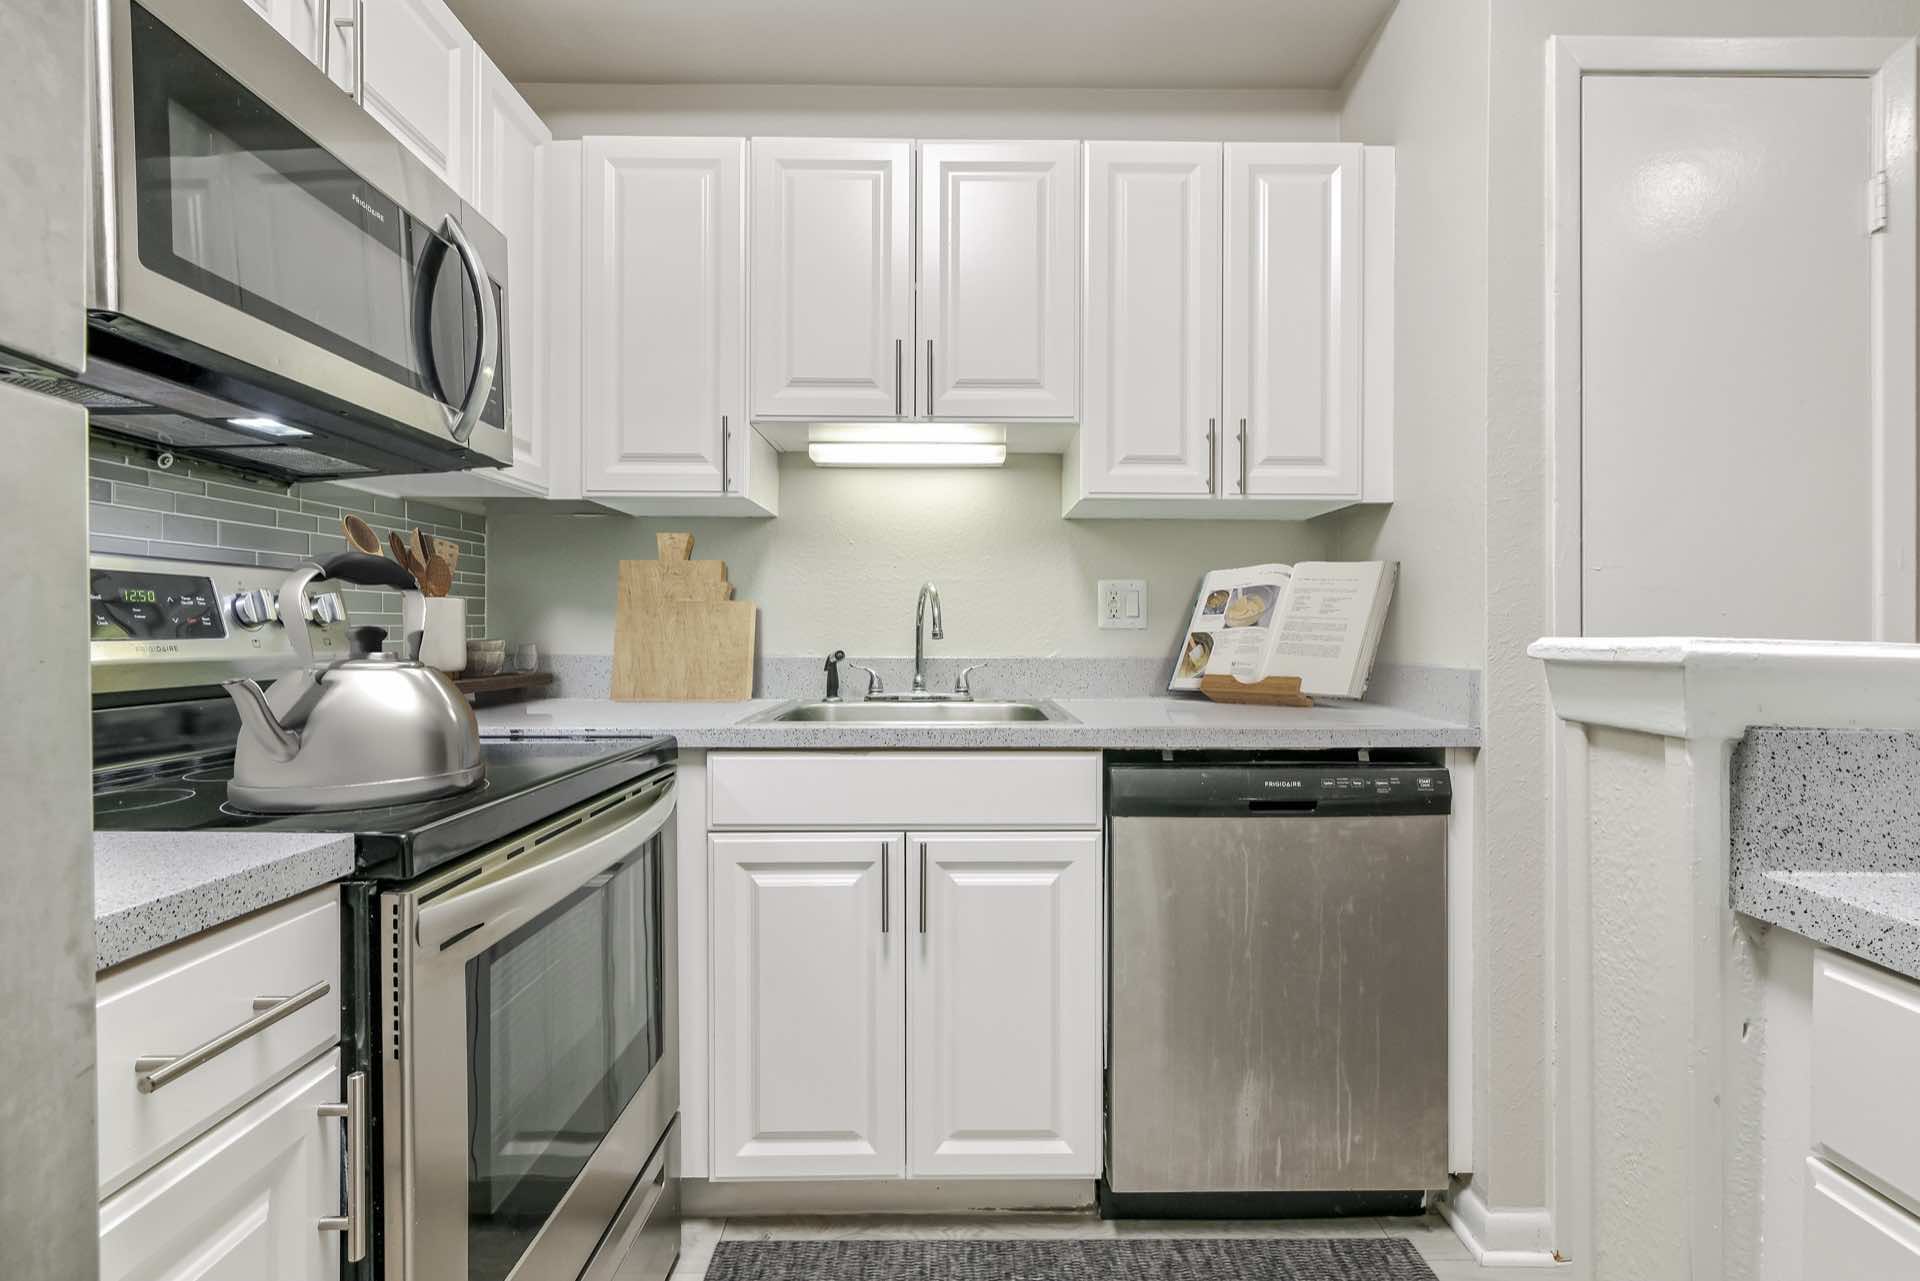 stainless steel appliances and white cabinets in kitchen